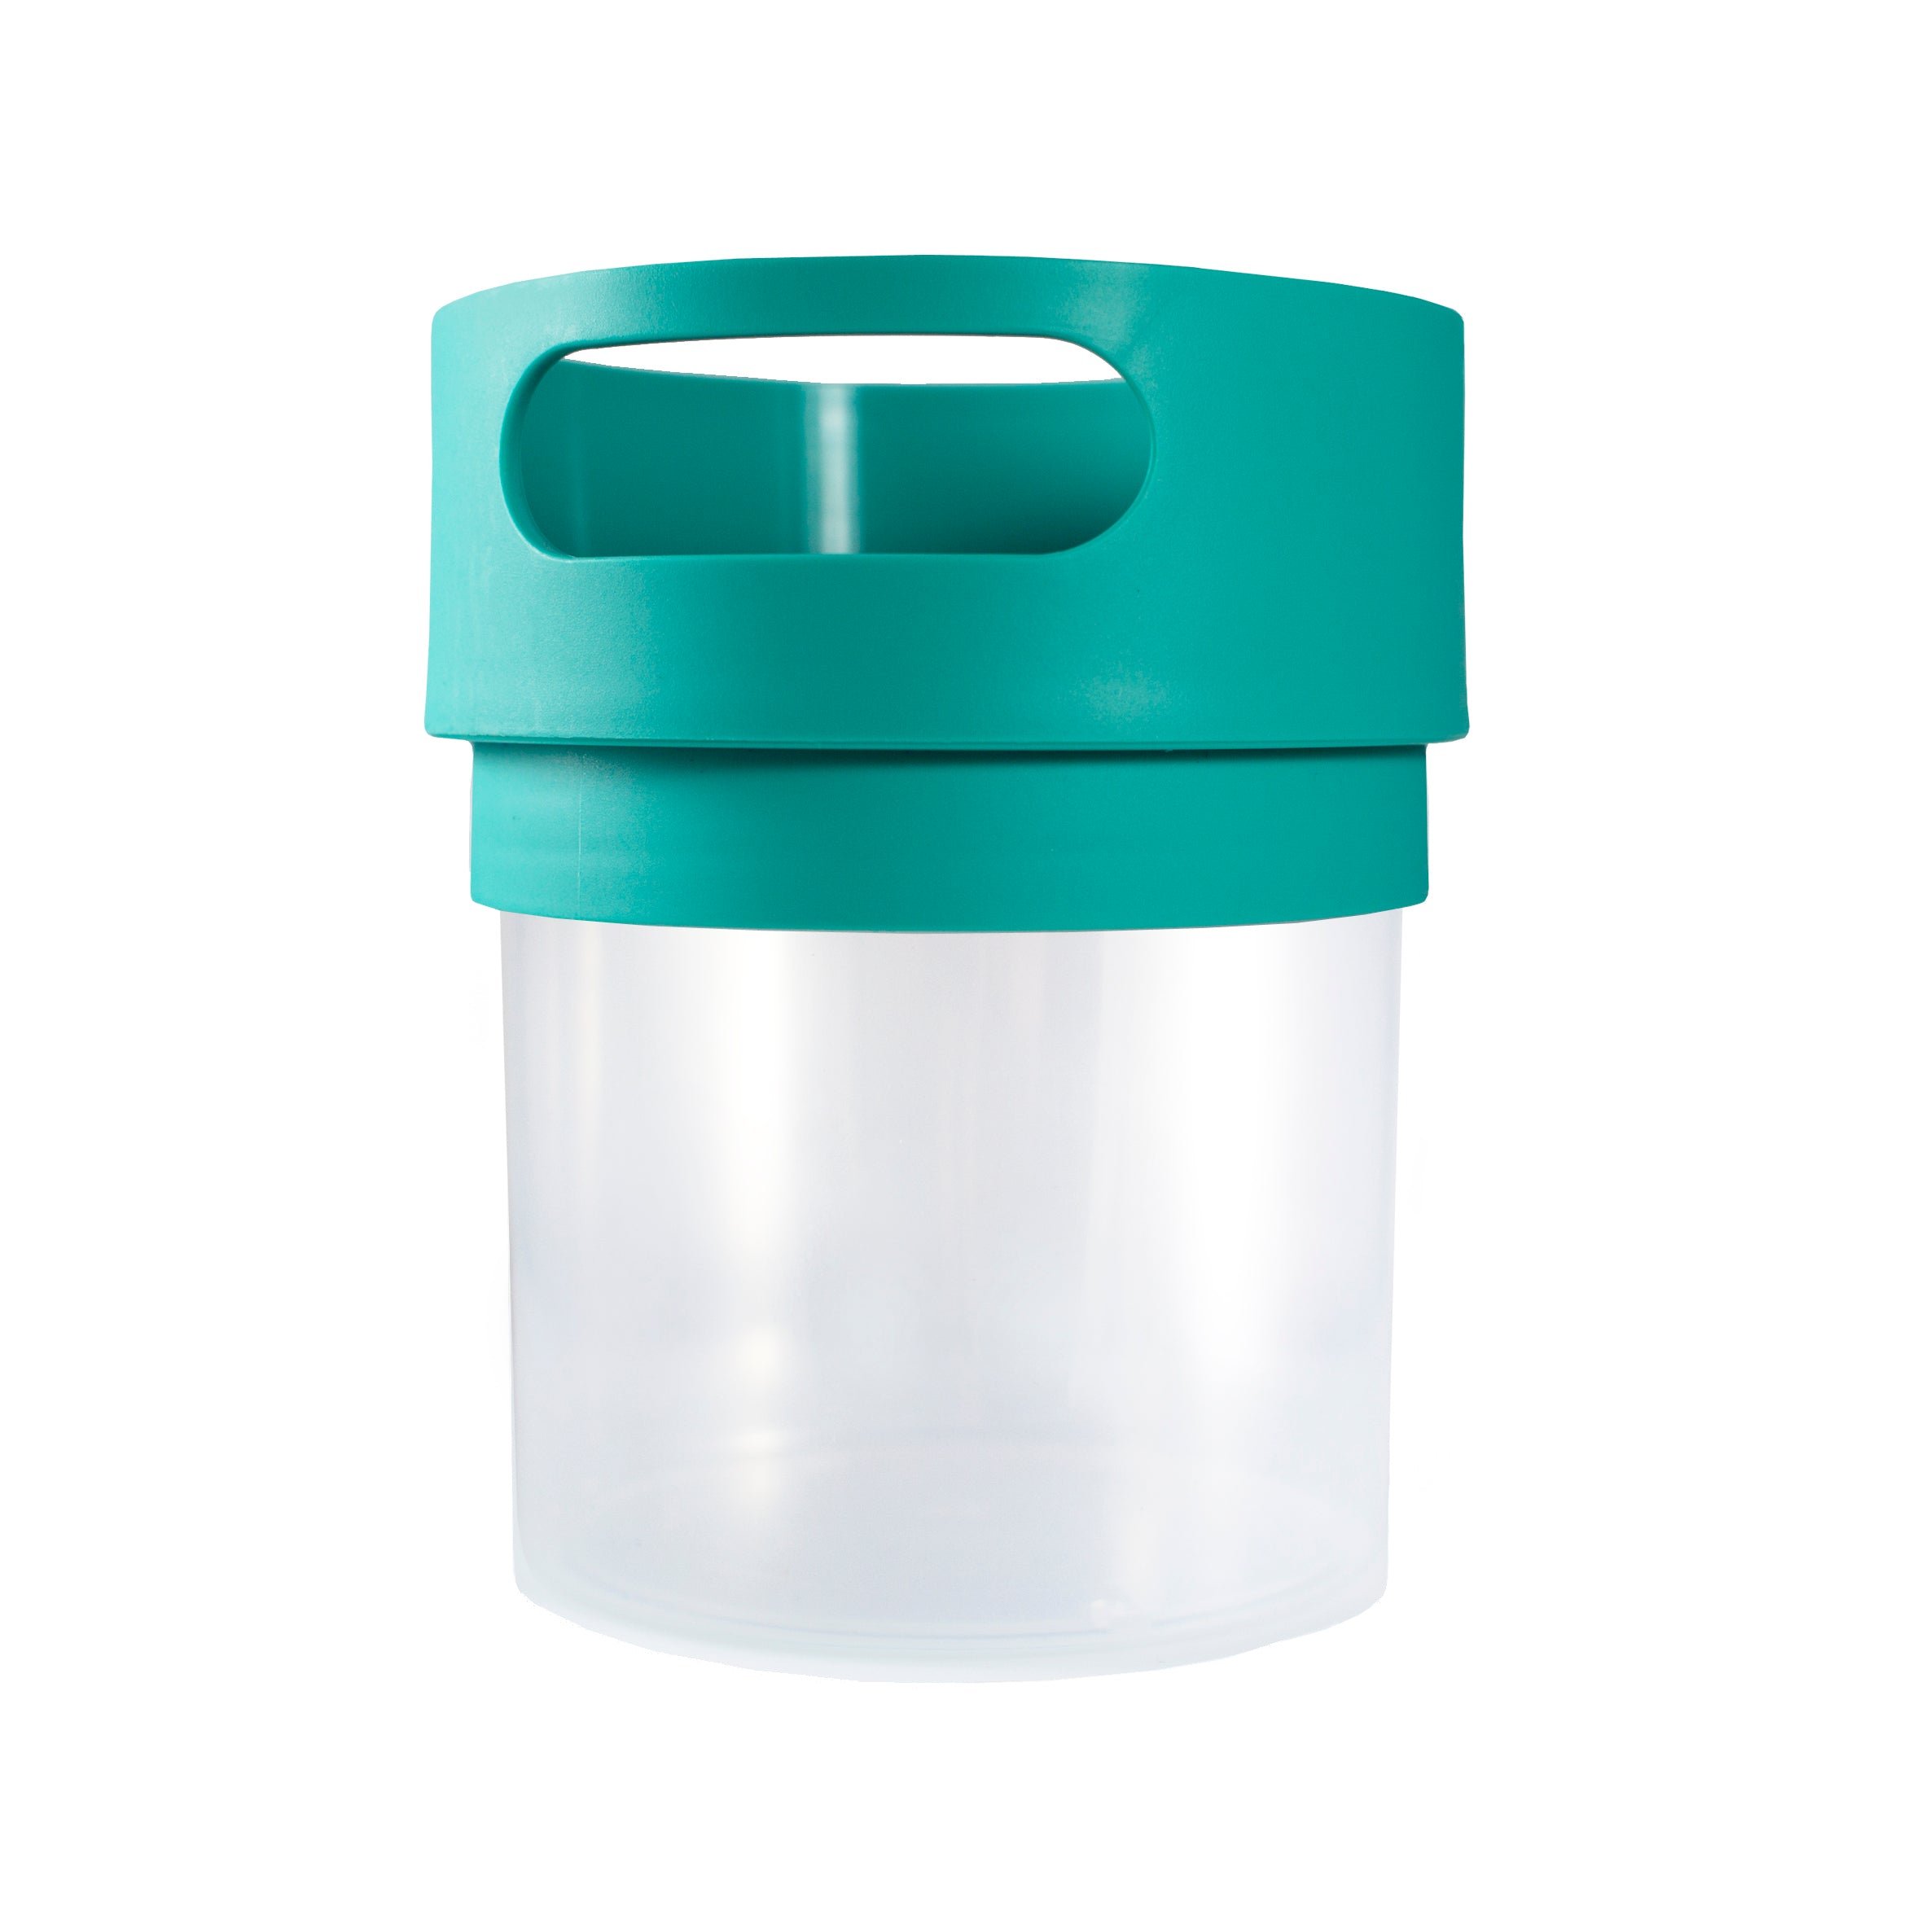 Munchie Mug No-Spill Snack Cup Small Teal, Made in The USA